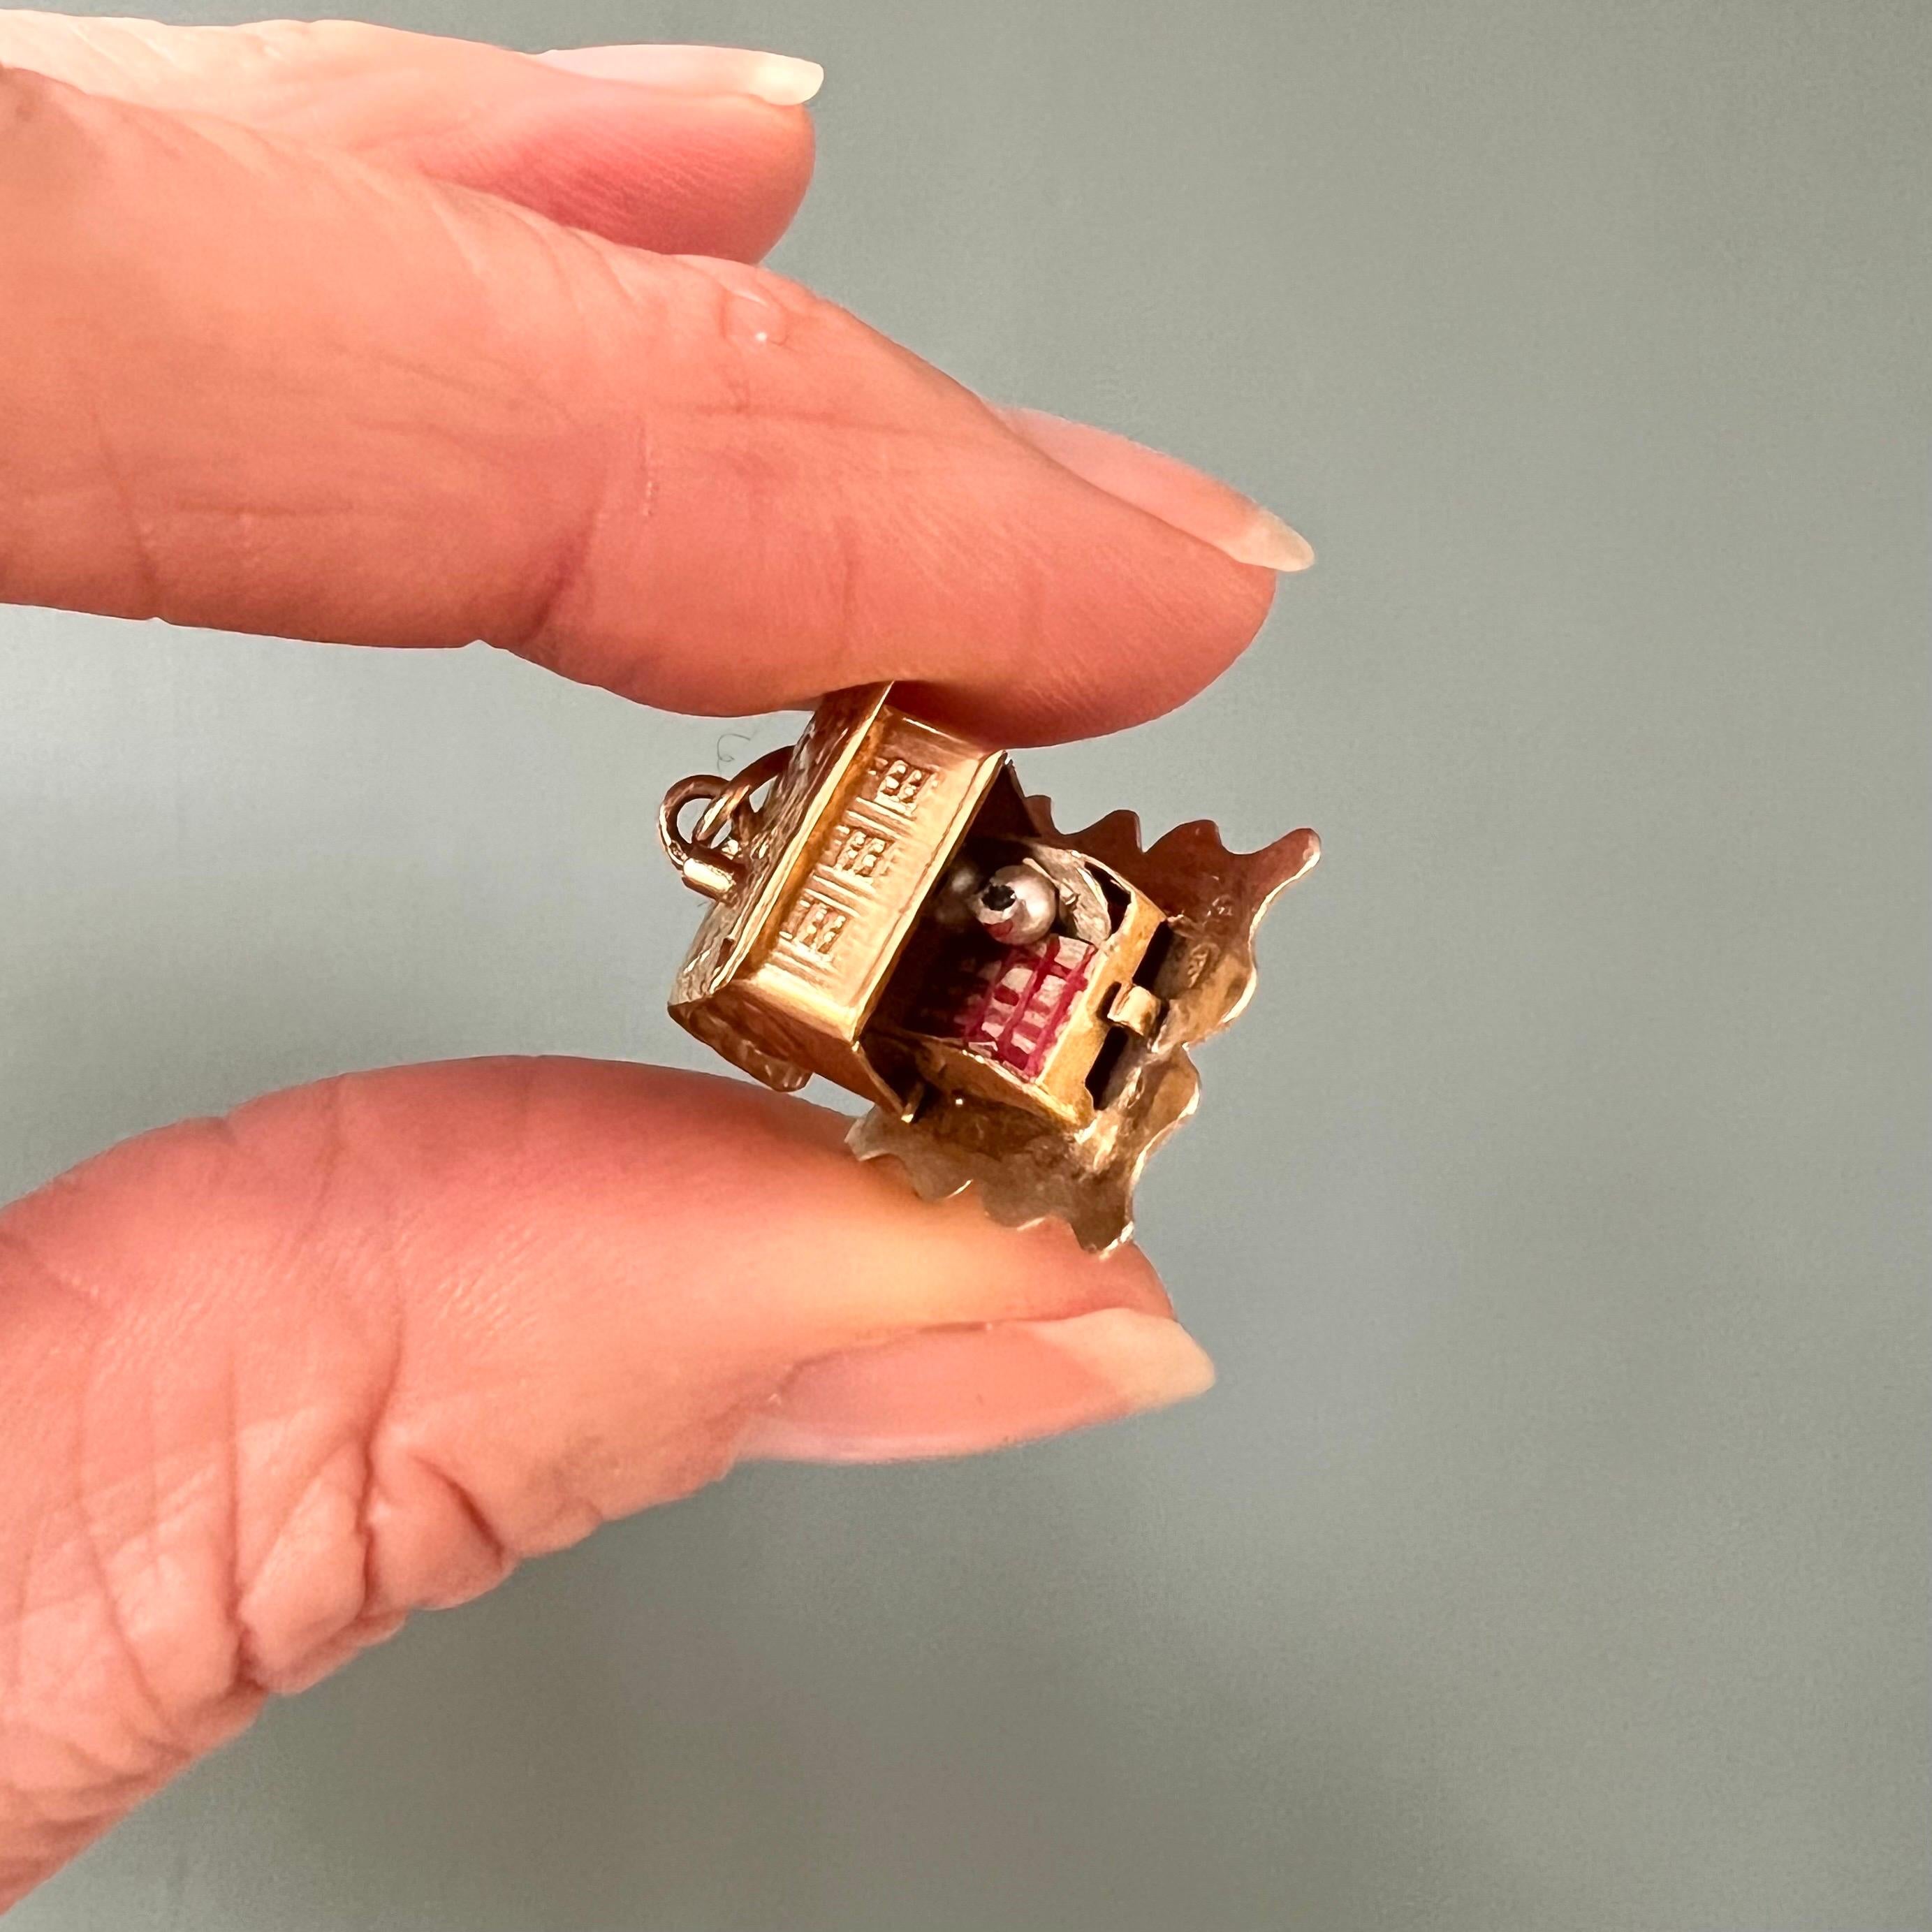 A lovely vintage 14 karat gold cottage cabin charm pendant. The roof of this cabin can be opened, and then a beautiful scene appears of a couple lying in bed nice and warm under a white and red checked blanket. 

Collect your own charms as wearable